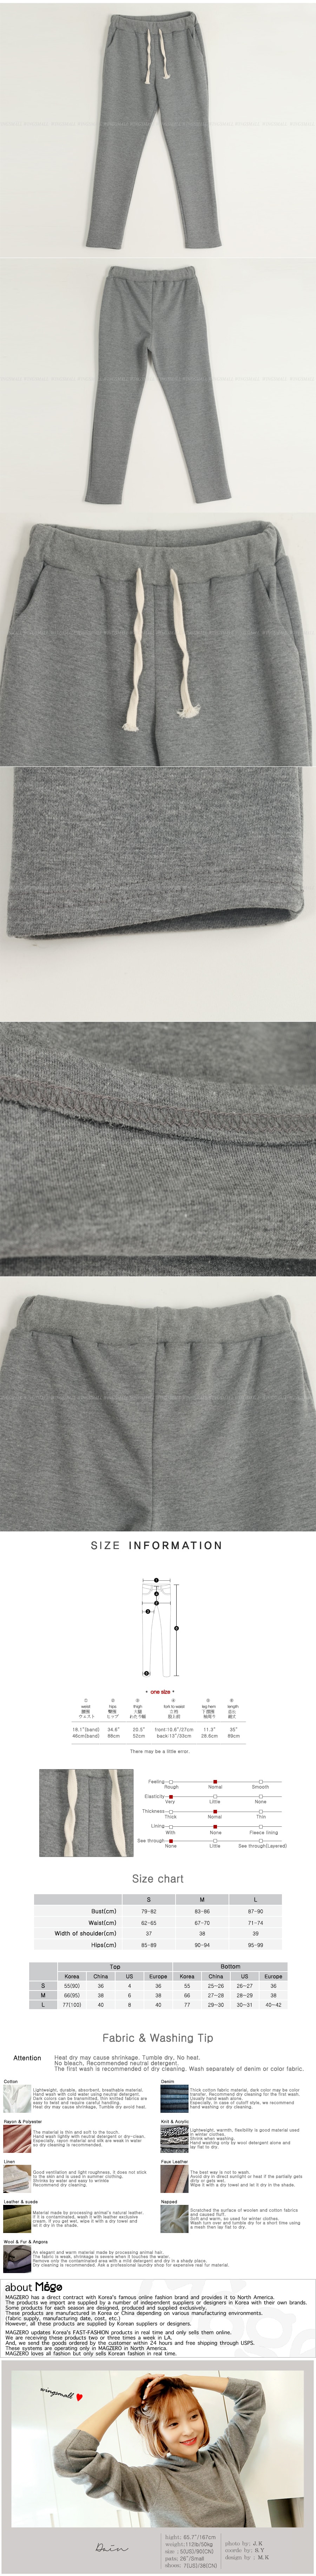 [Autumn New Set] Hooded Sweatshirt and Sweatpants 2 Pieces Charcoal One Size(S-M)